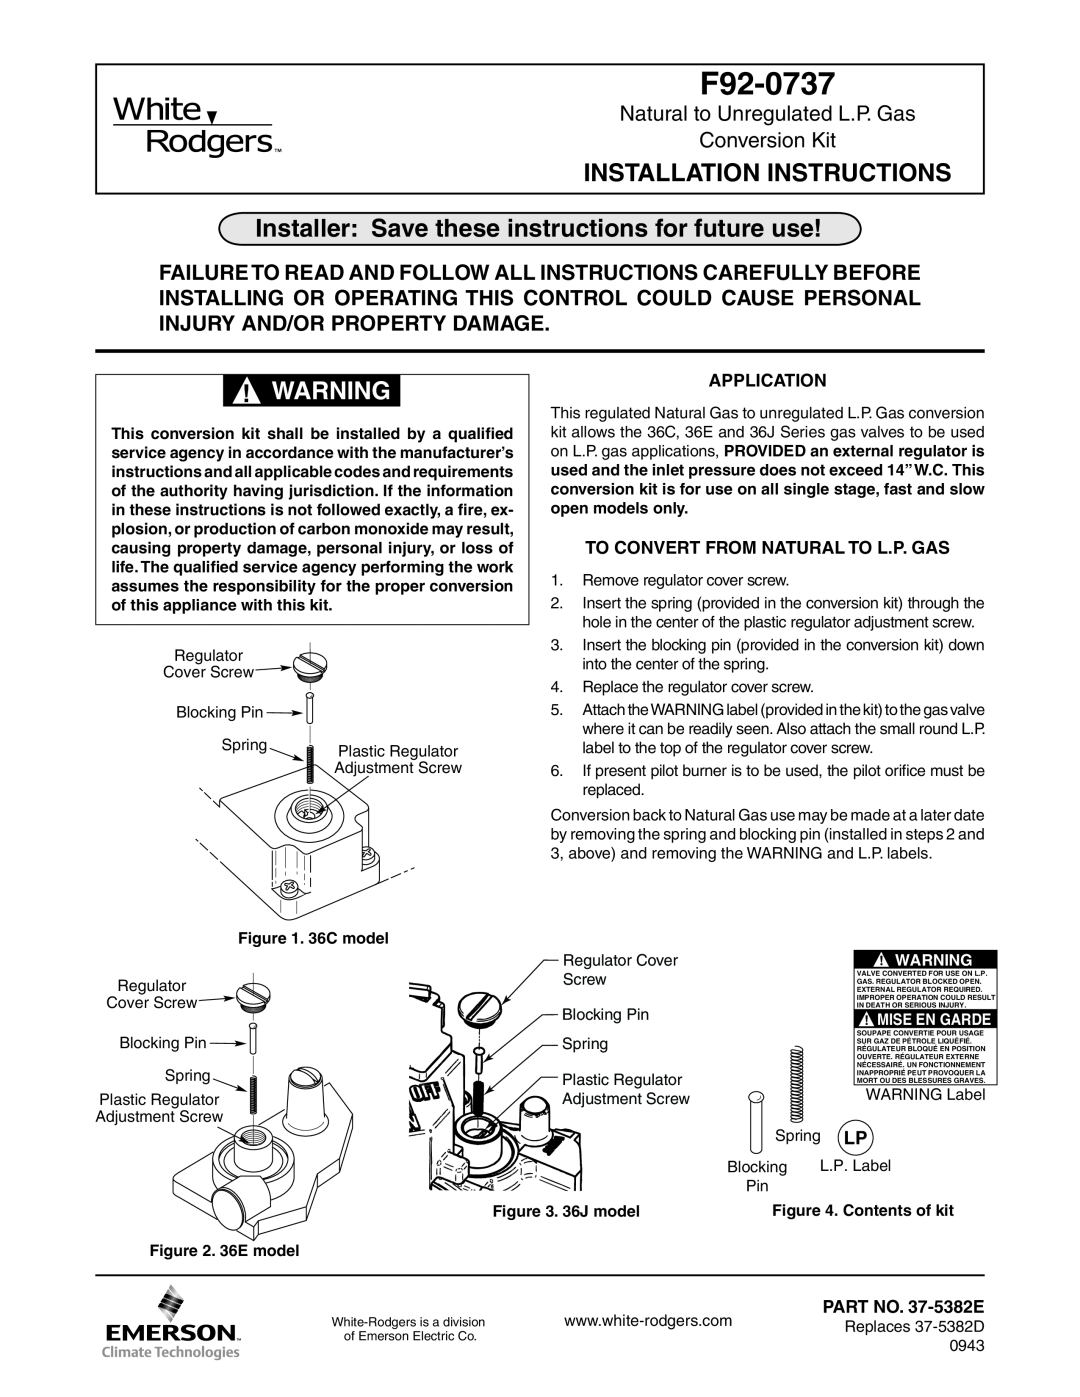 White Rodgers F92-0737 installation instructions Natural to Unregulated L.P. Gas Conversion Kit, Application, 36C model 